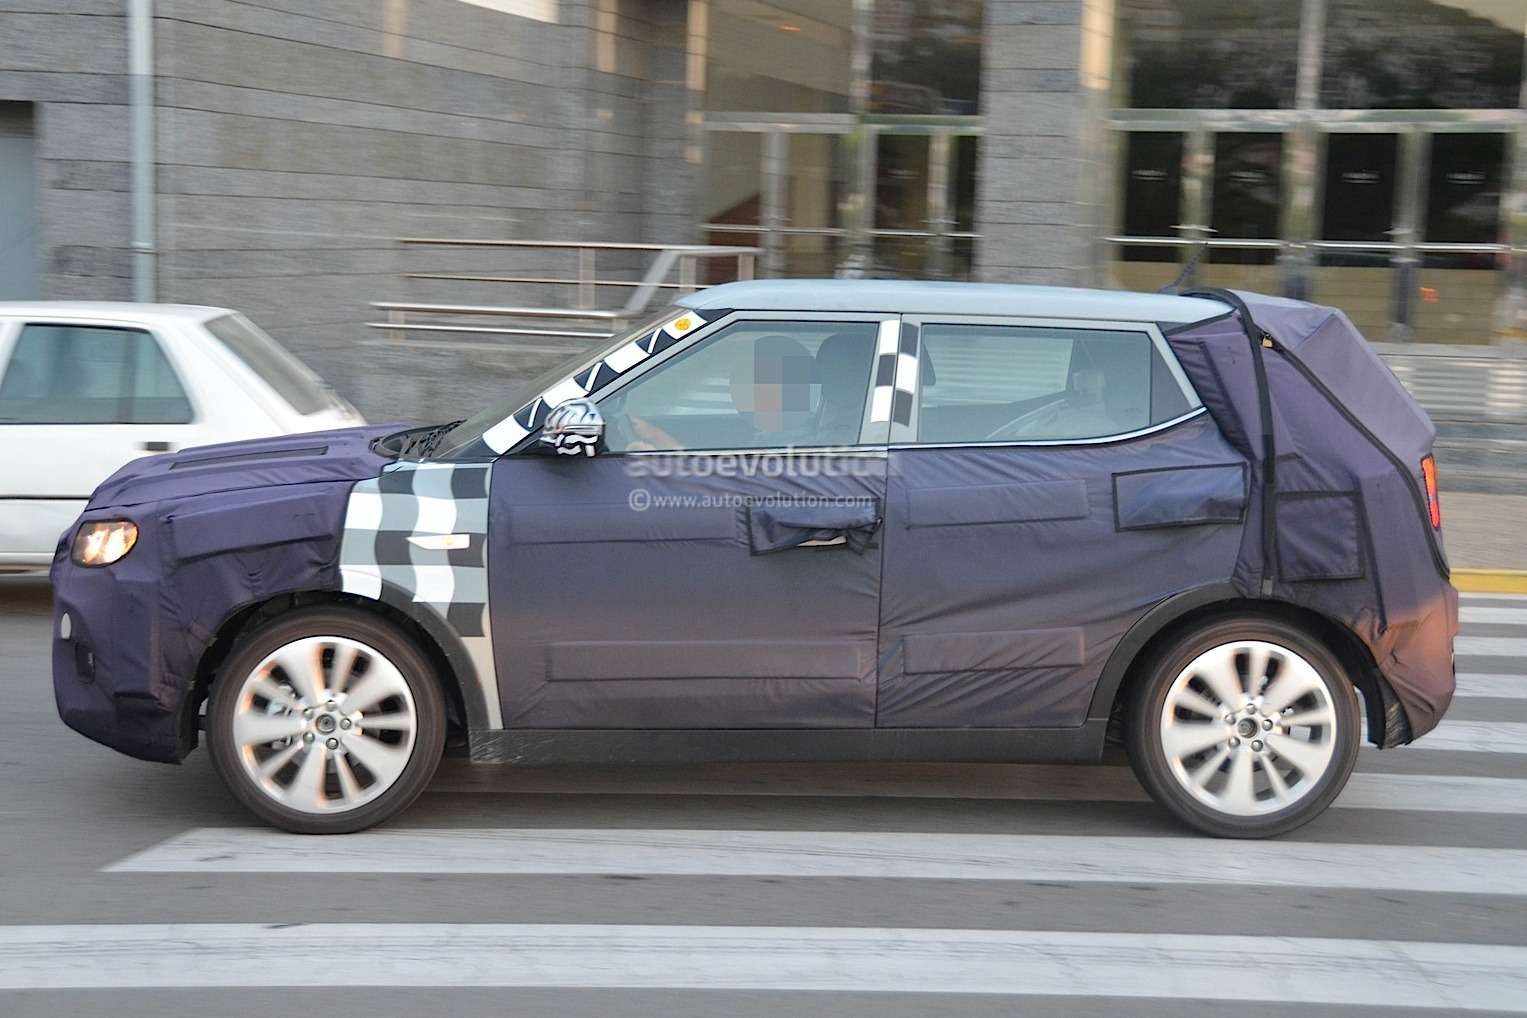 ssangyong-x100-prototype-spied-testing-in-europe-photo-gallery_5